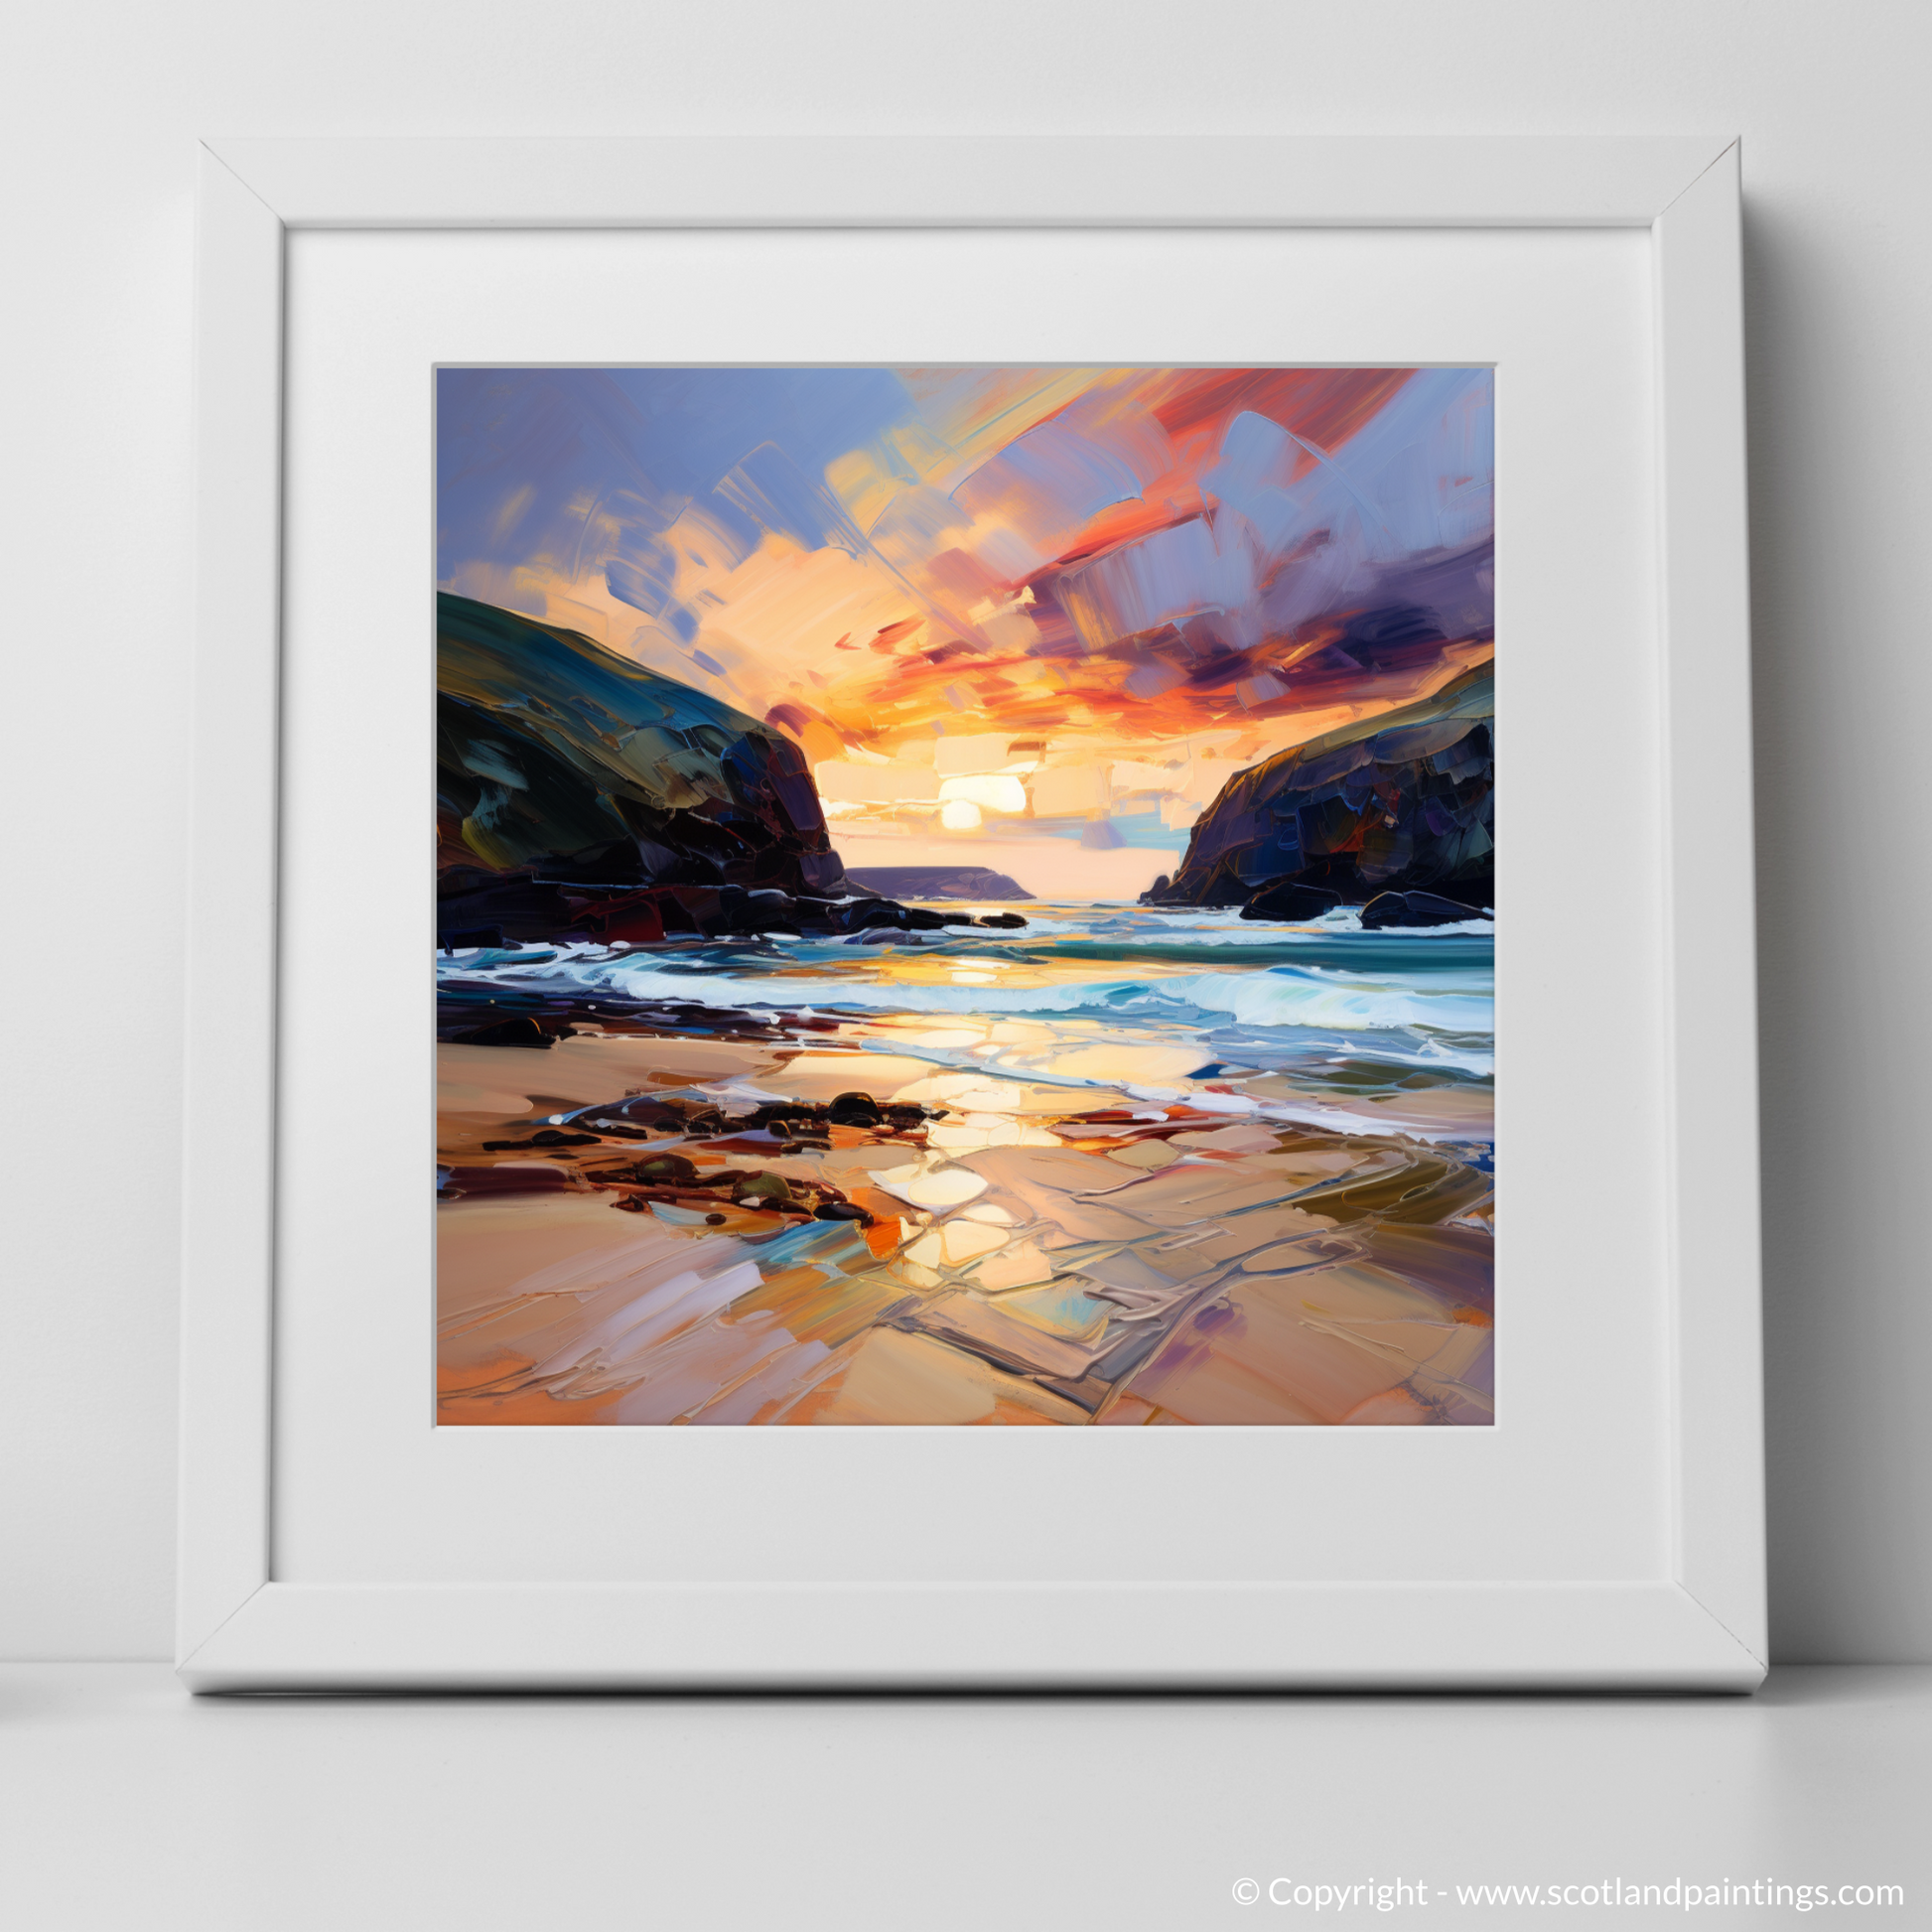 Art Print of Sandwood Bay at dusk with a white frame